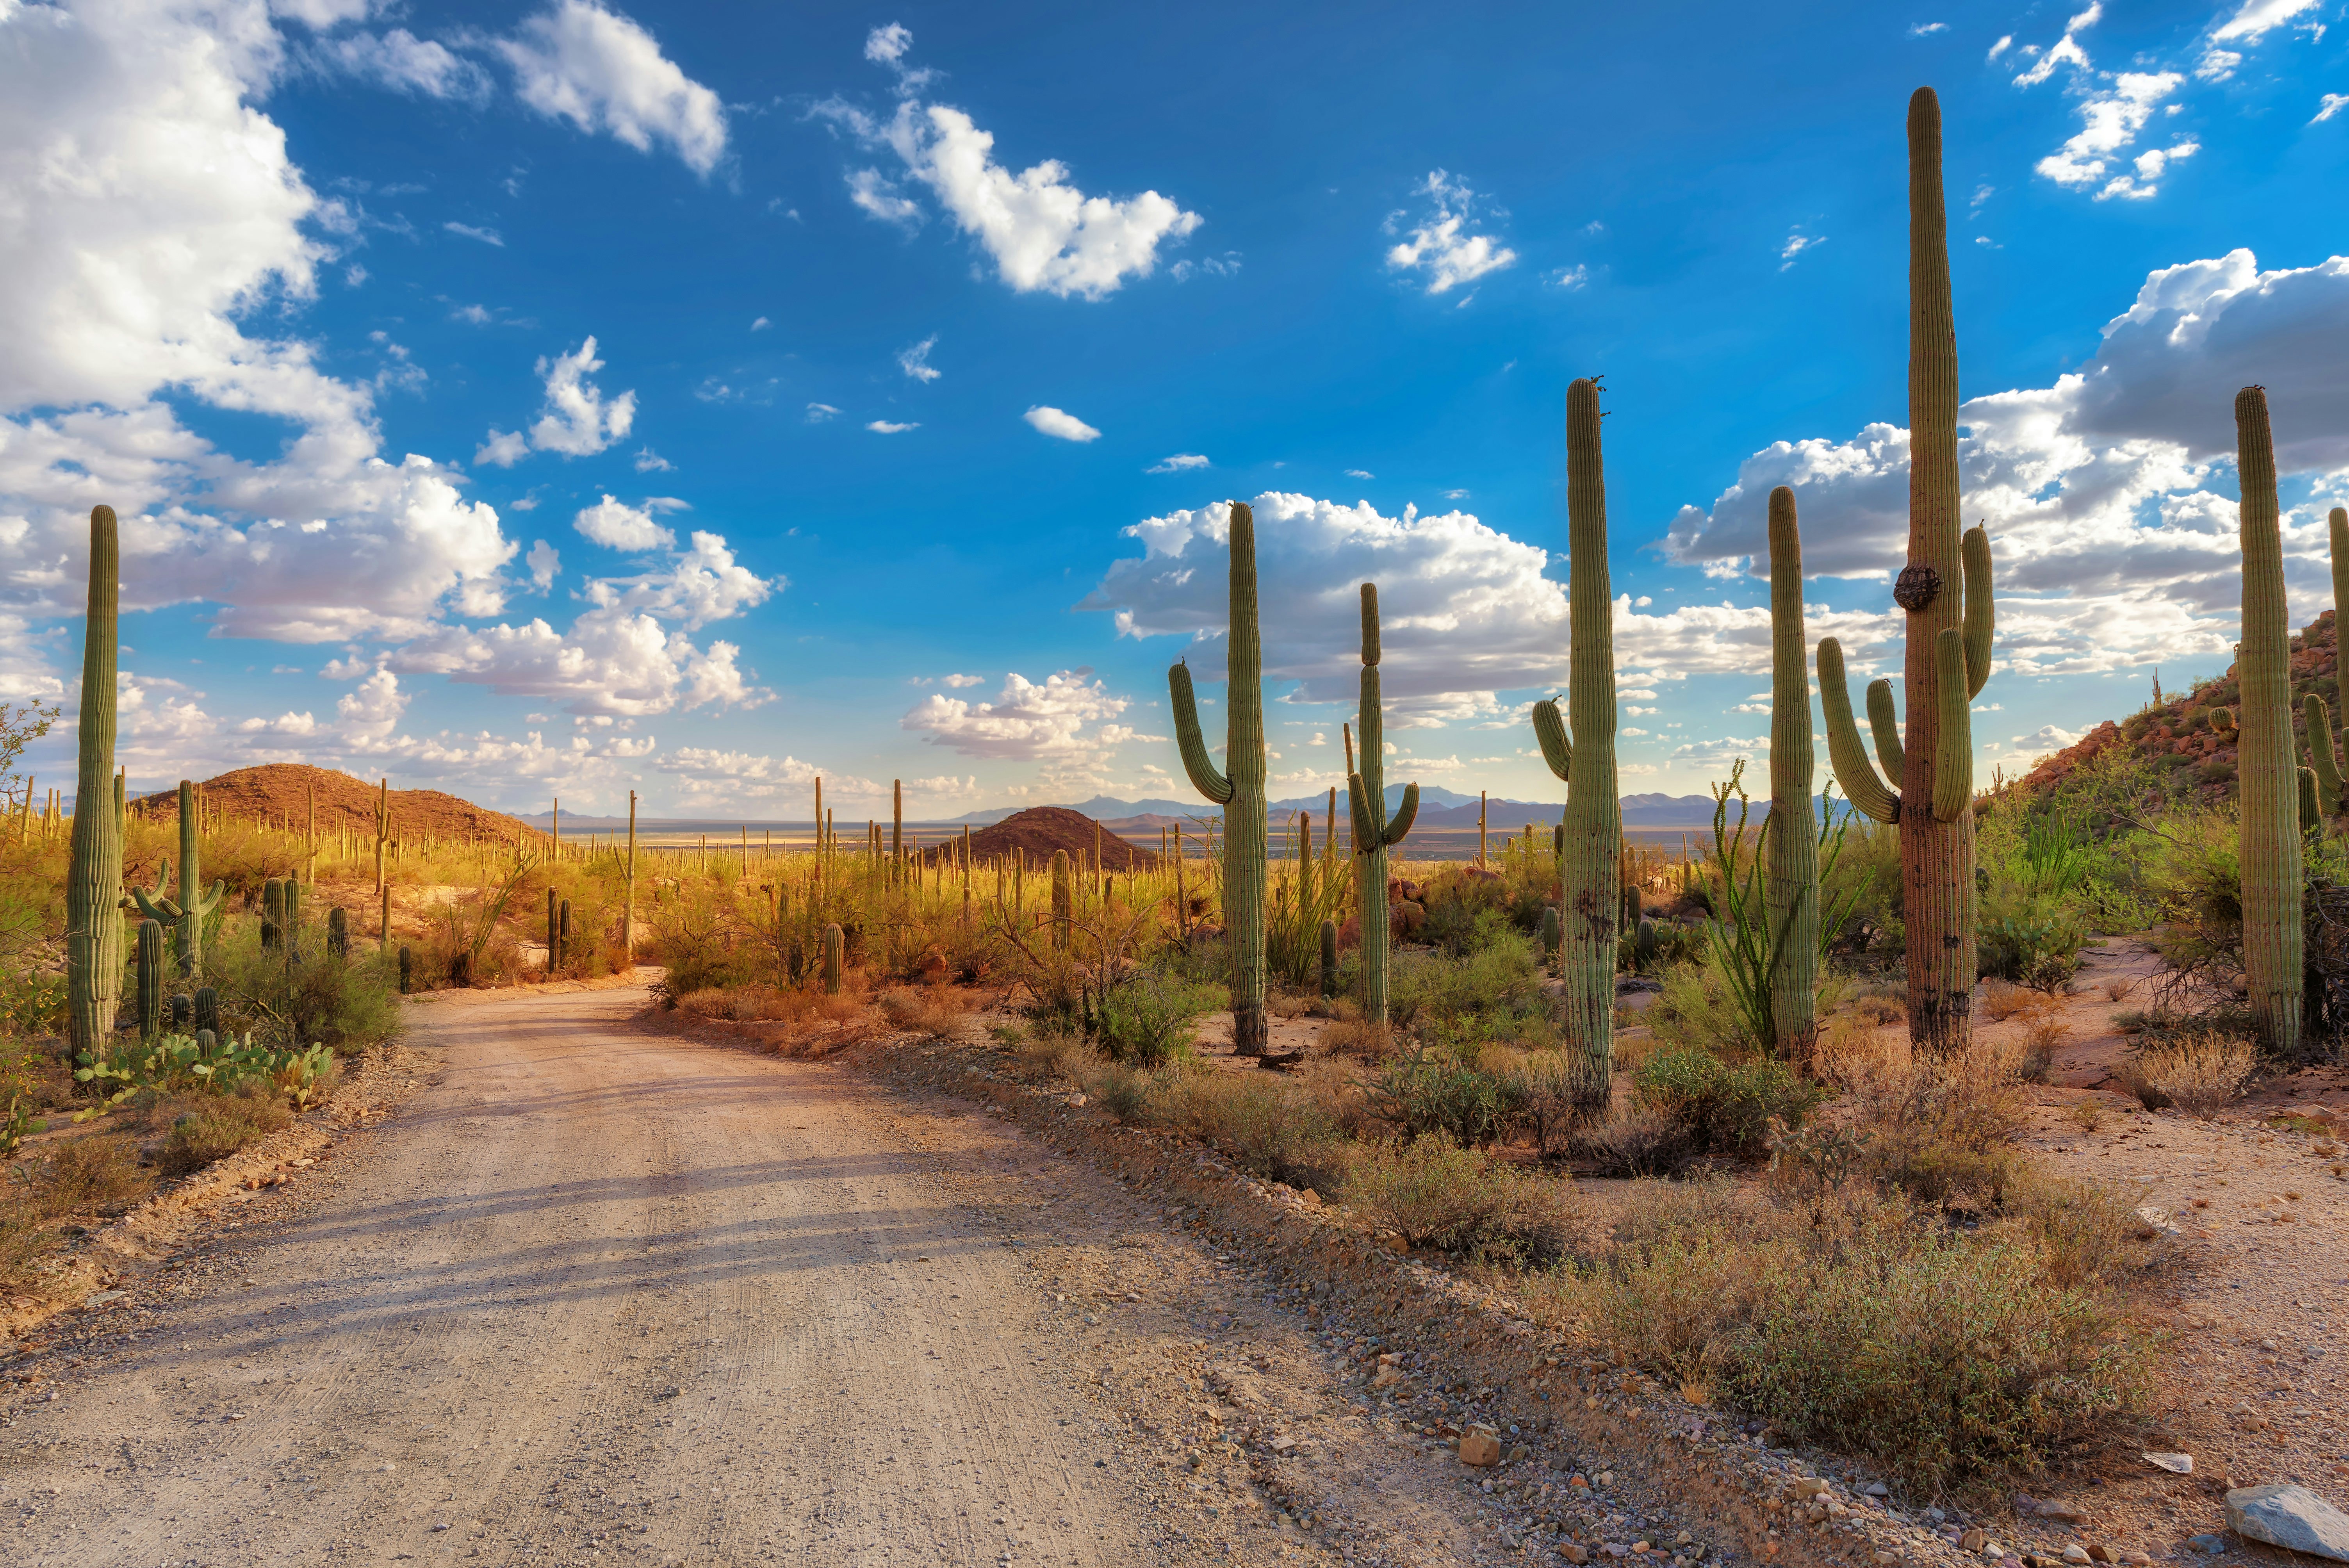 Tall cacti alongside a dirt road with blue skies and clouds above